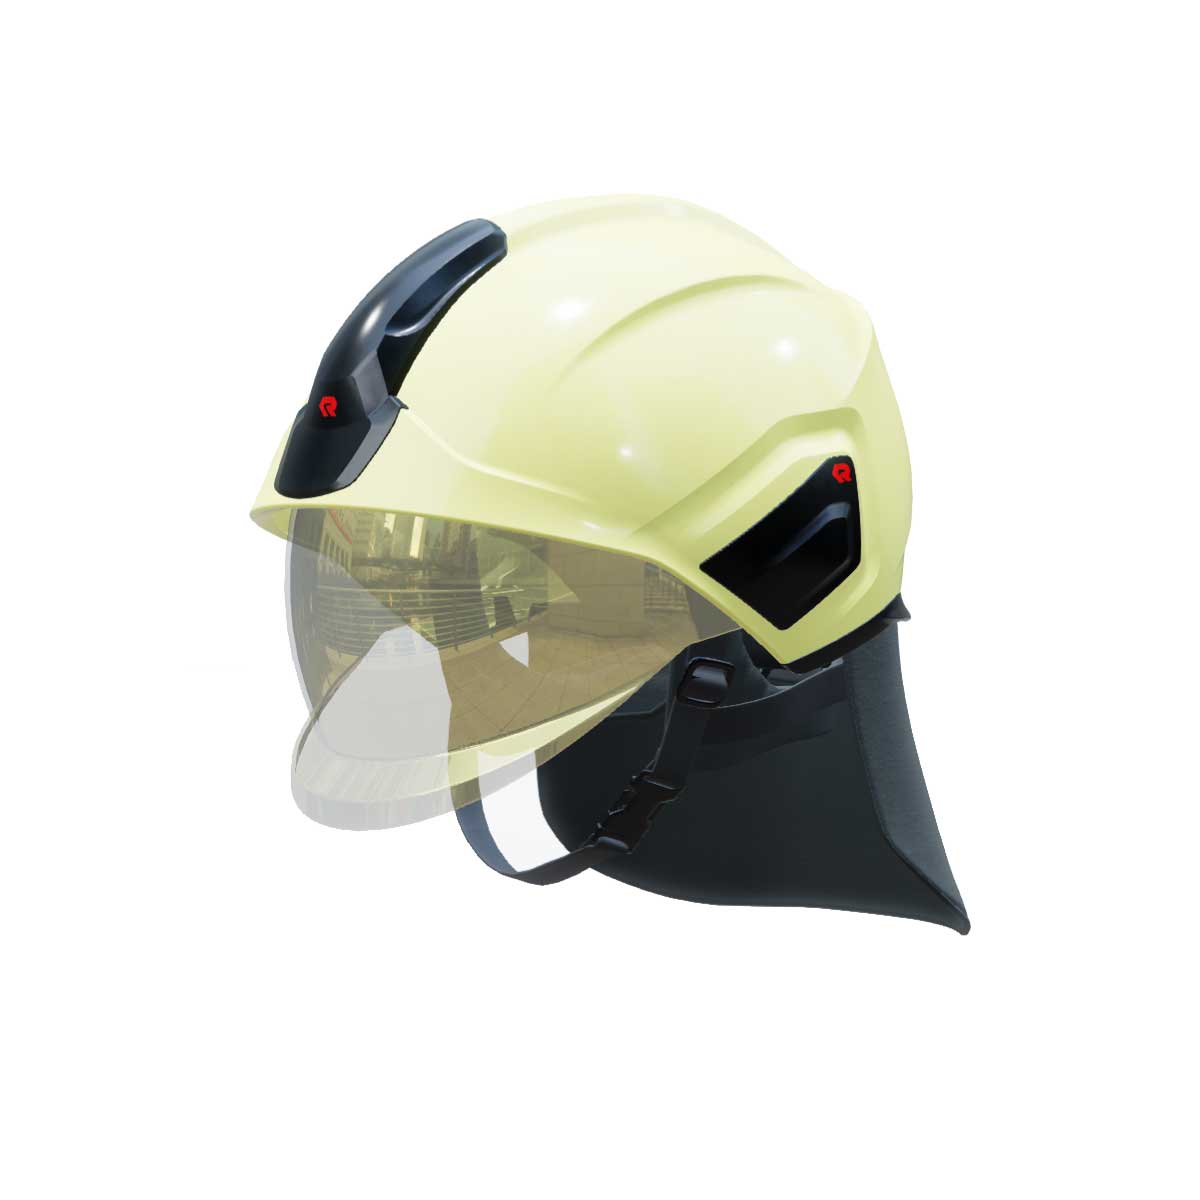 Fire Helmet H30 Luminous with neck protection and face shield